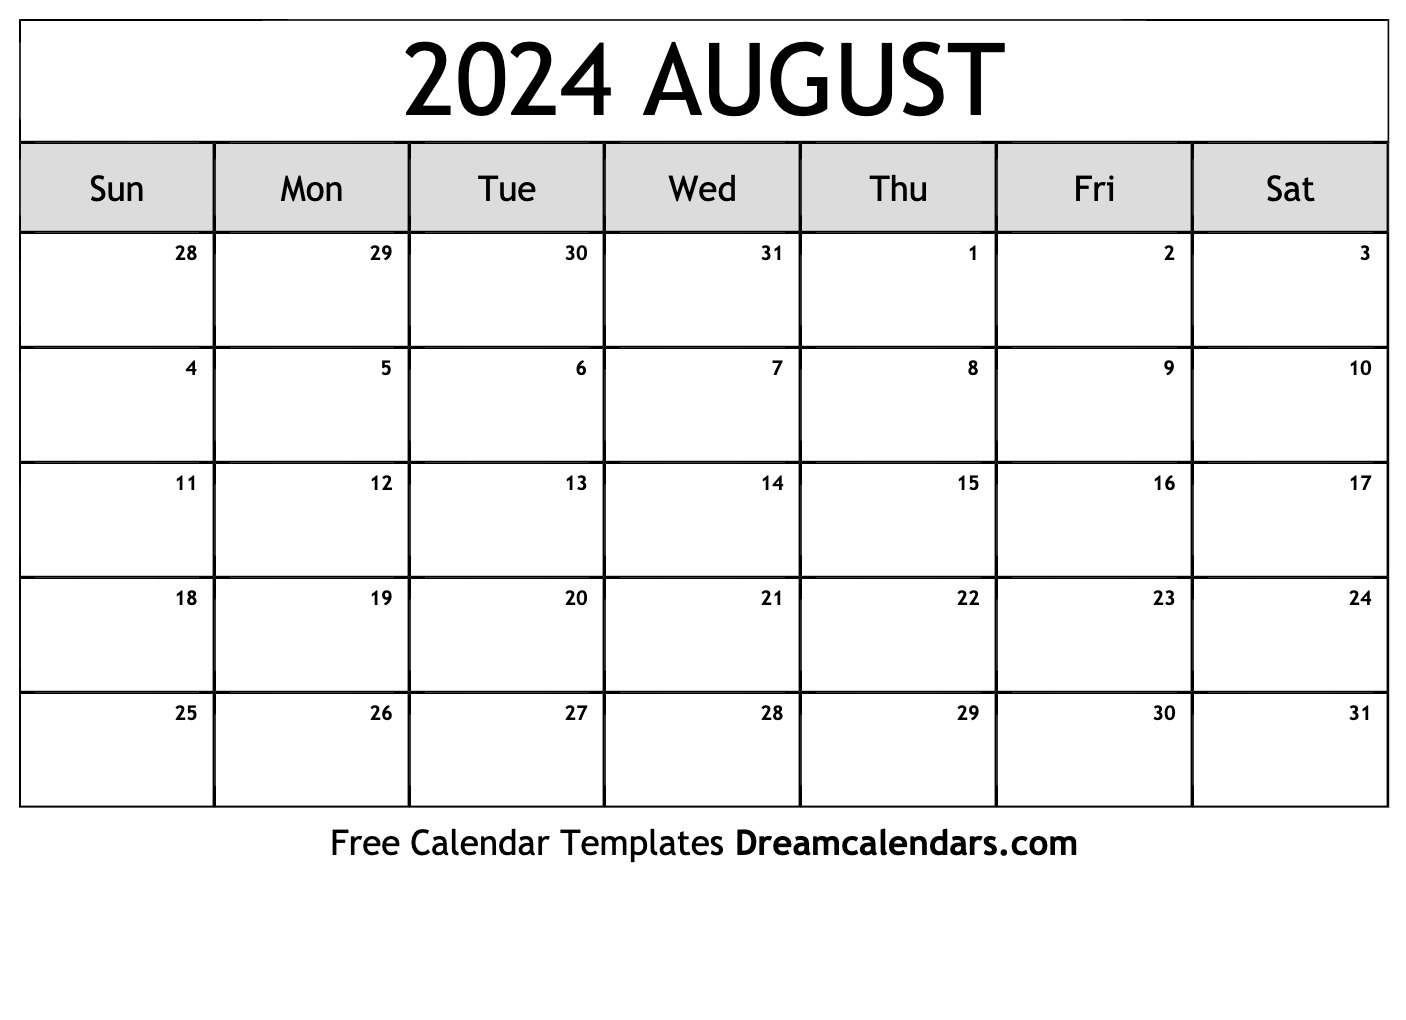 August 2024 Calendar | Free Blank Printable With Holidays for Calendar August 2024 Printable